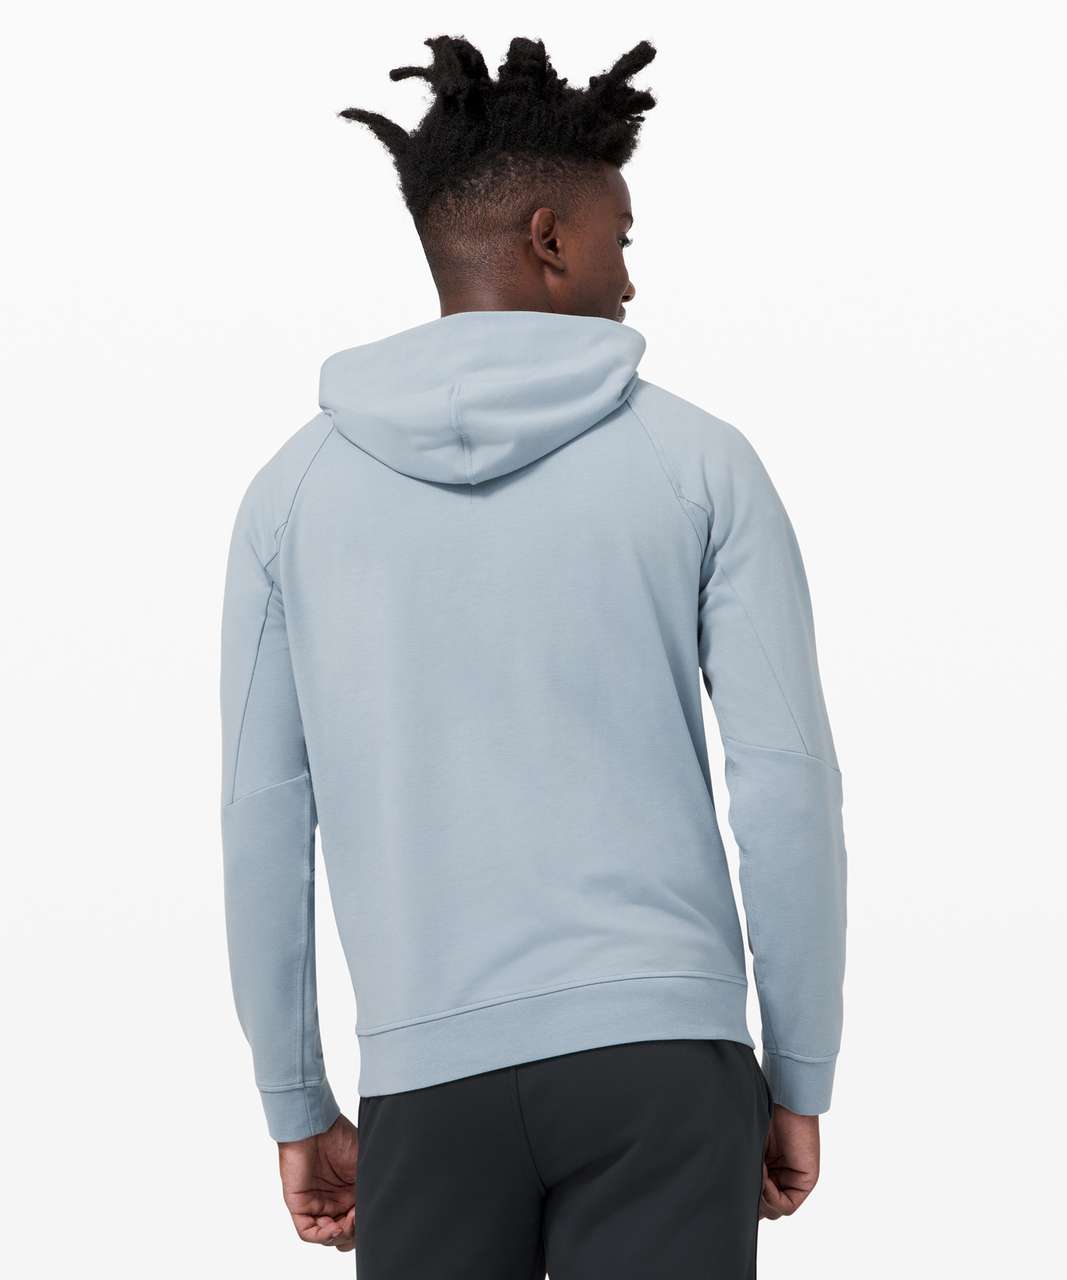 Lululemon City Sweat Pullover Hoodie French Terry - Chambray